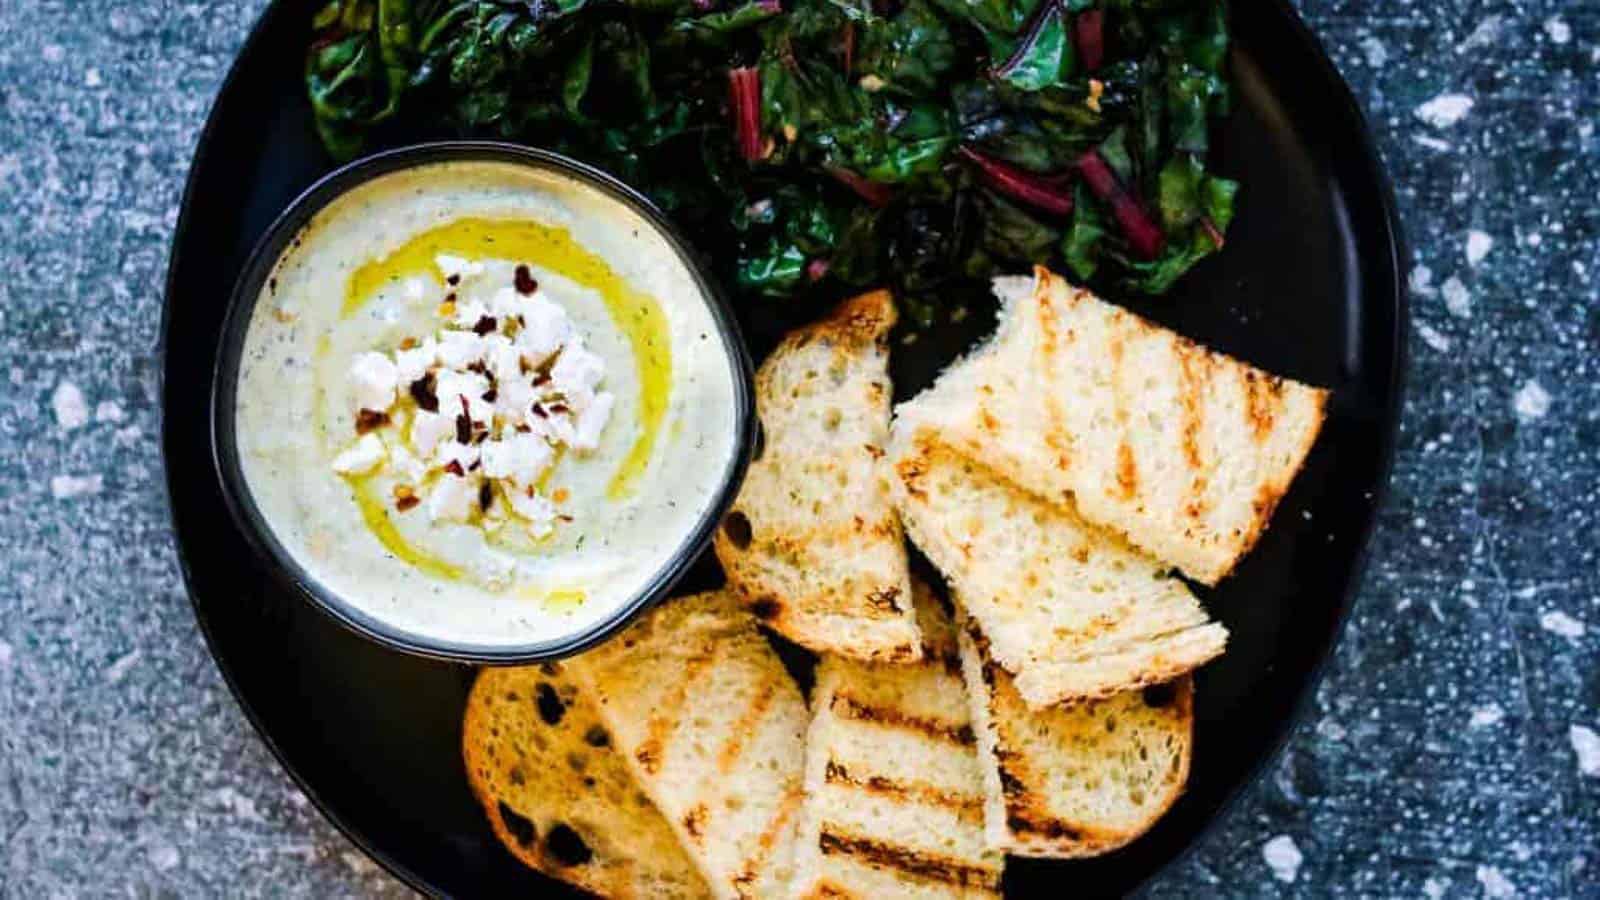 Whipped Feta Spread is a tangy, salty, creamy dip with a punch of garlic and fresh dill. It is delicious scooped up with pita chips or raw veggies.